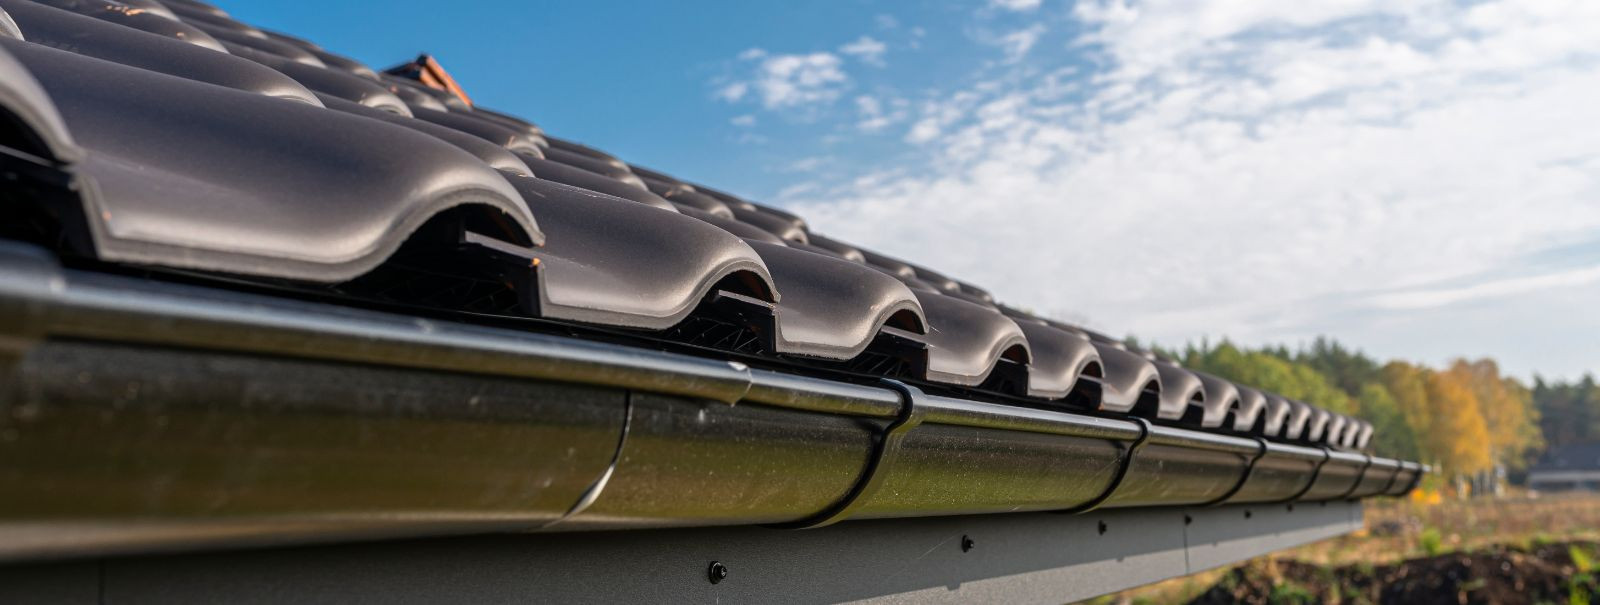 Gutters are an essential component of a building's roofing system, designed to collect and divert rainwater away from the structure. While their primary role is